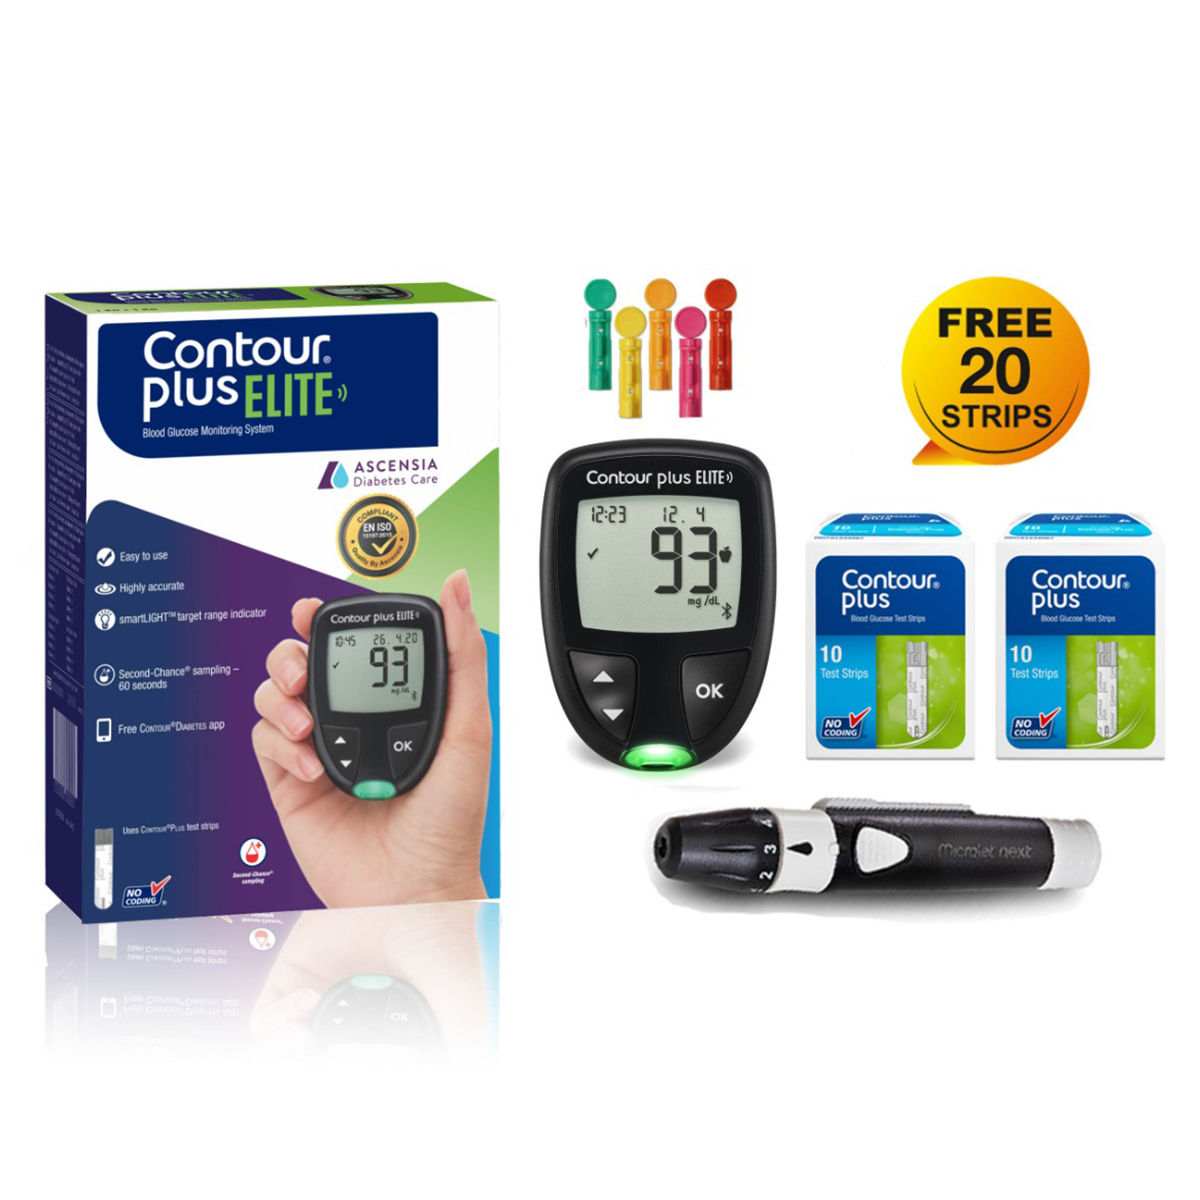 Buy Contour Plus Elite Blood Glucose Monitoring System with Free 20 Strips, 1 Kit Online